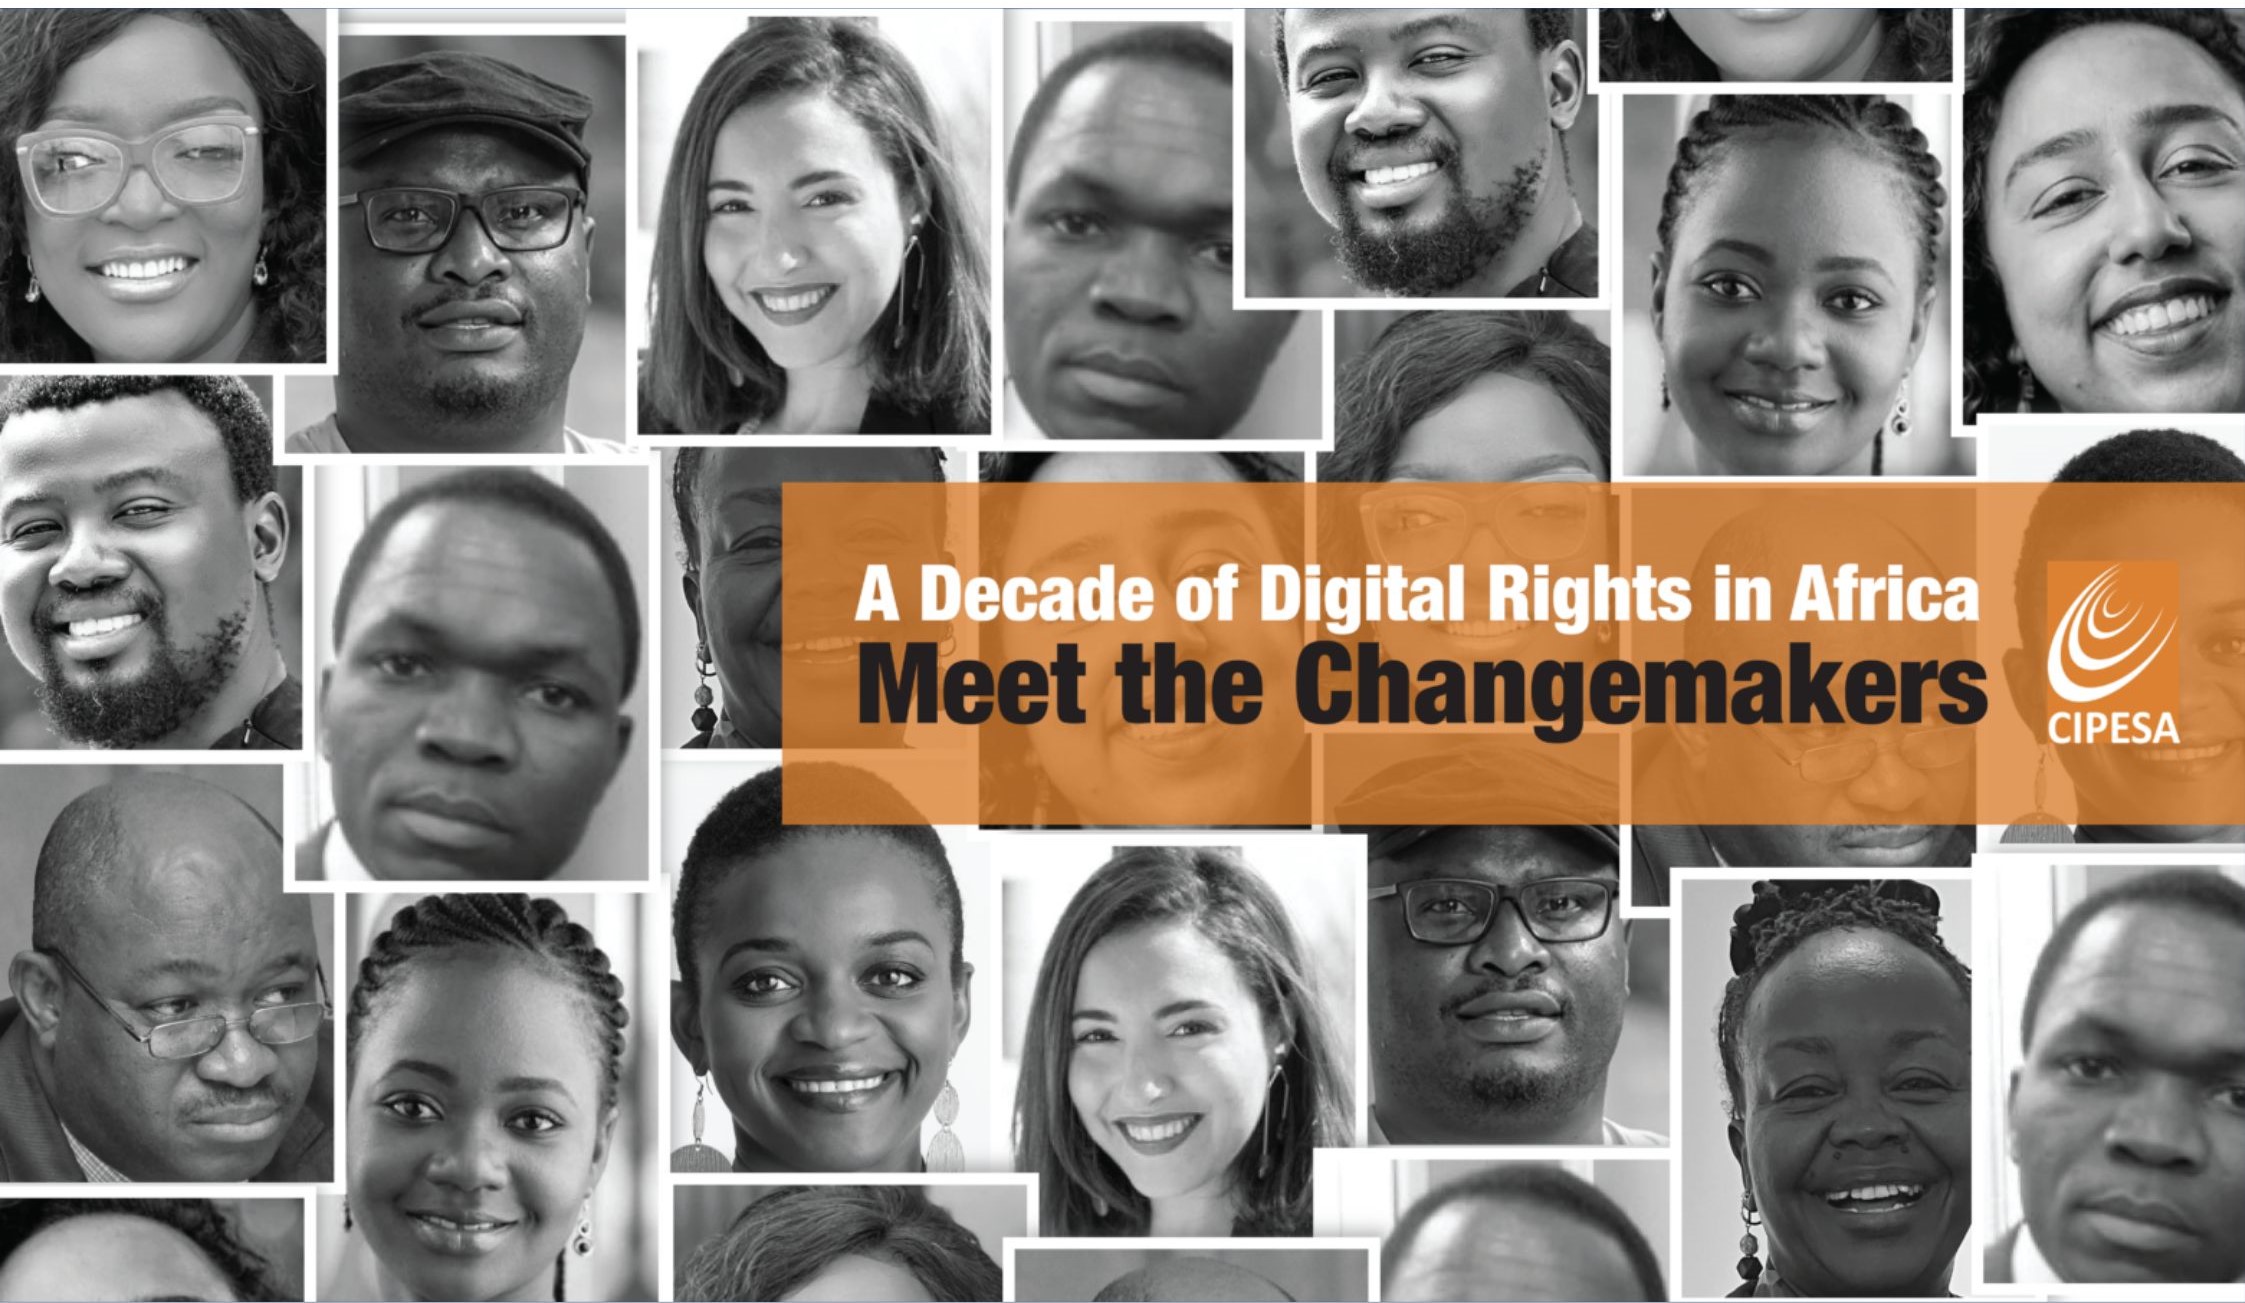 A Decade of Internet Freedom in Africa: Report Documents Reflections and Insights from Change Makers